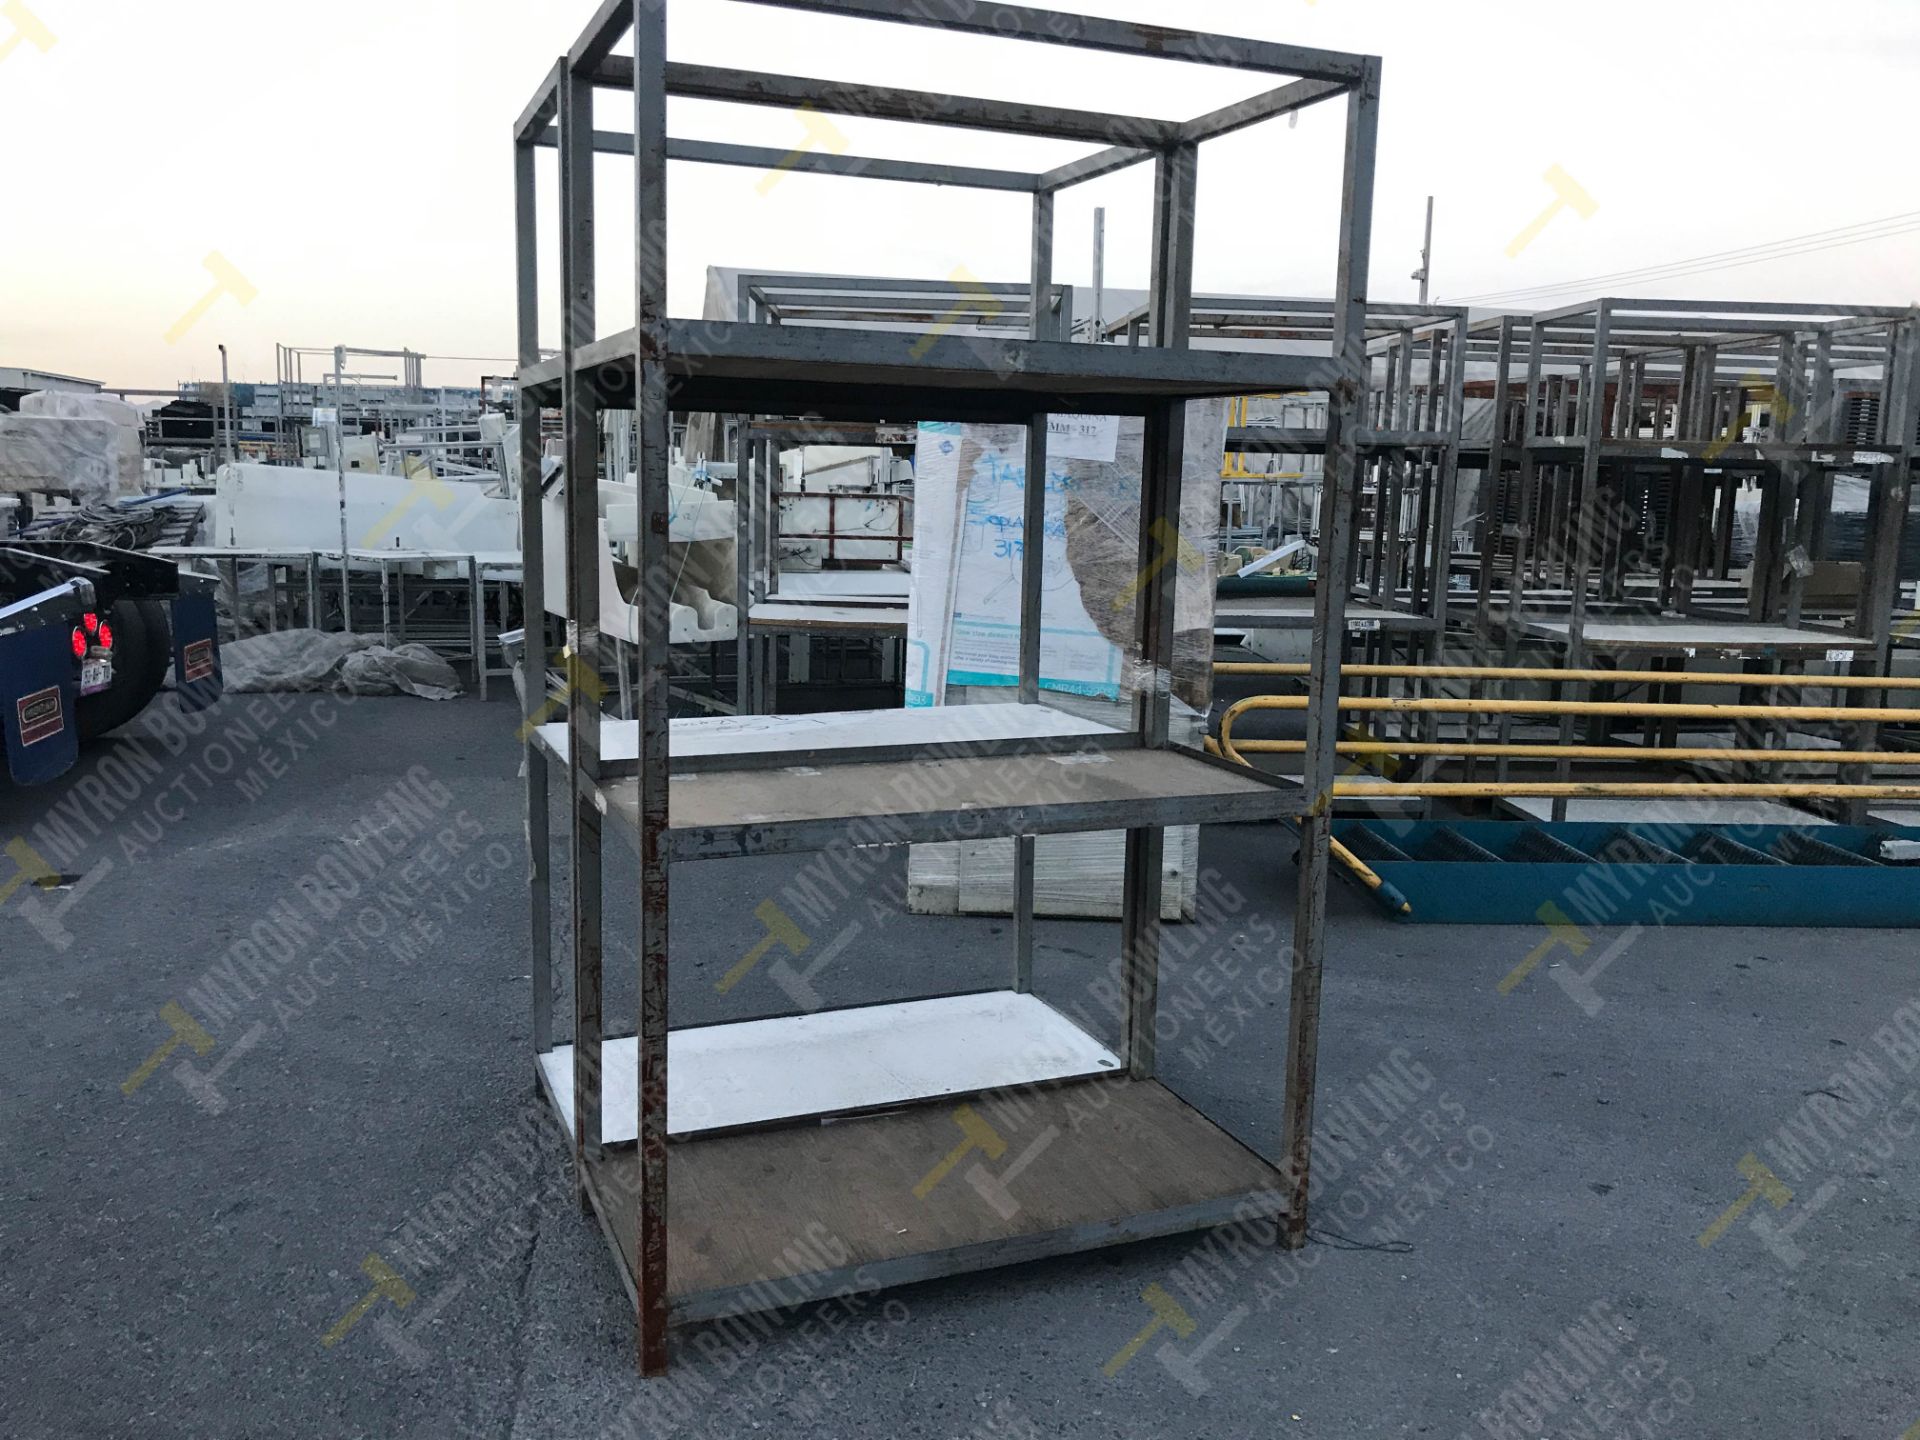 (12X) 3 LEVEL HEAVY DUTY STEEL SHELVING (DIMENSIONS 0.60x1.20x0.65 M / 2.10 M HIGH) - Image 2 of 8